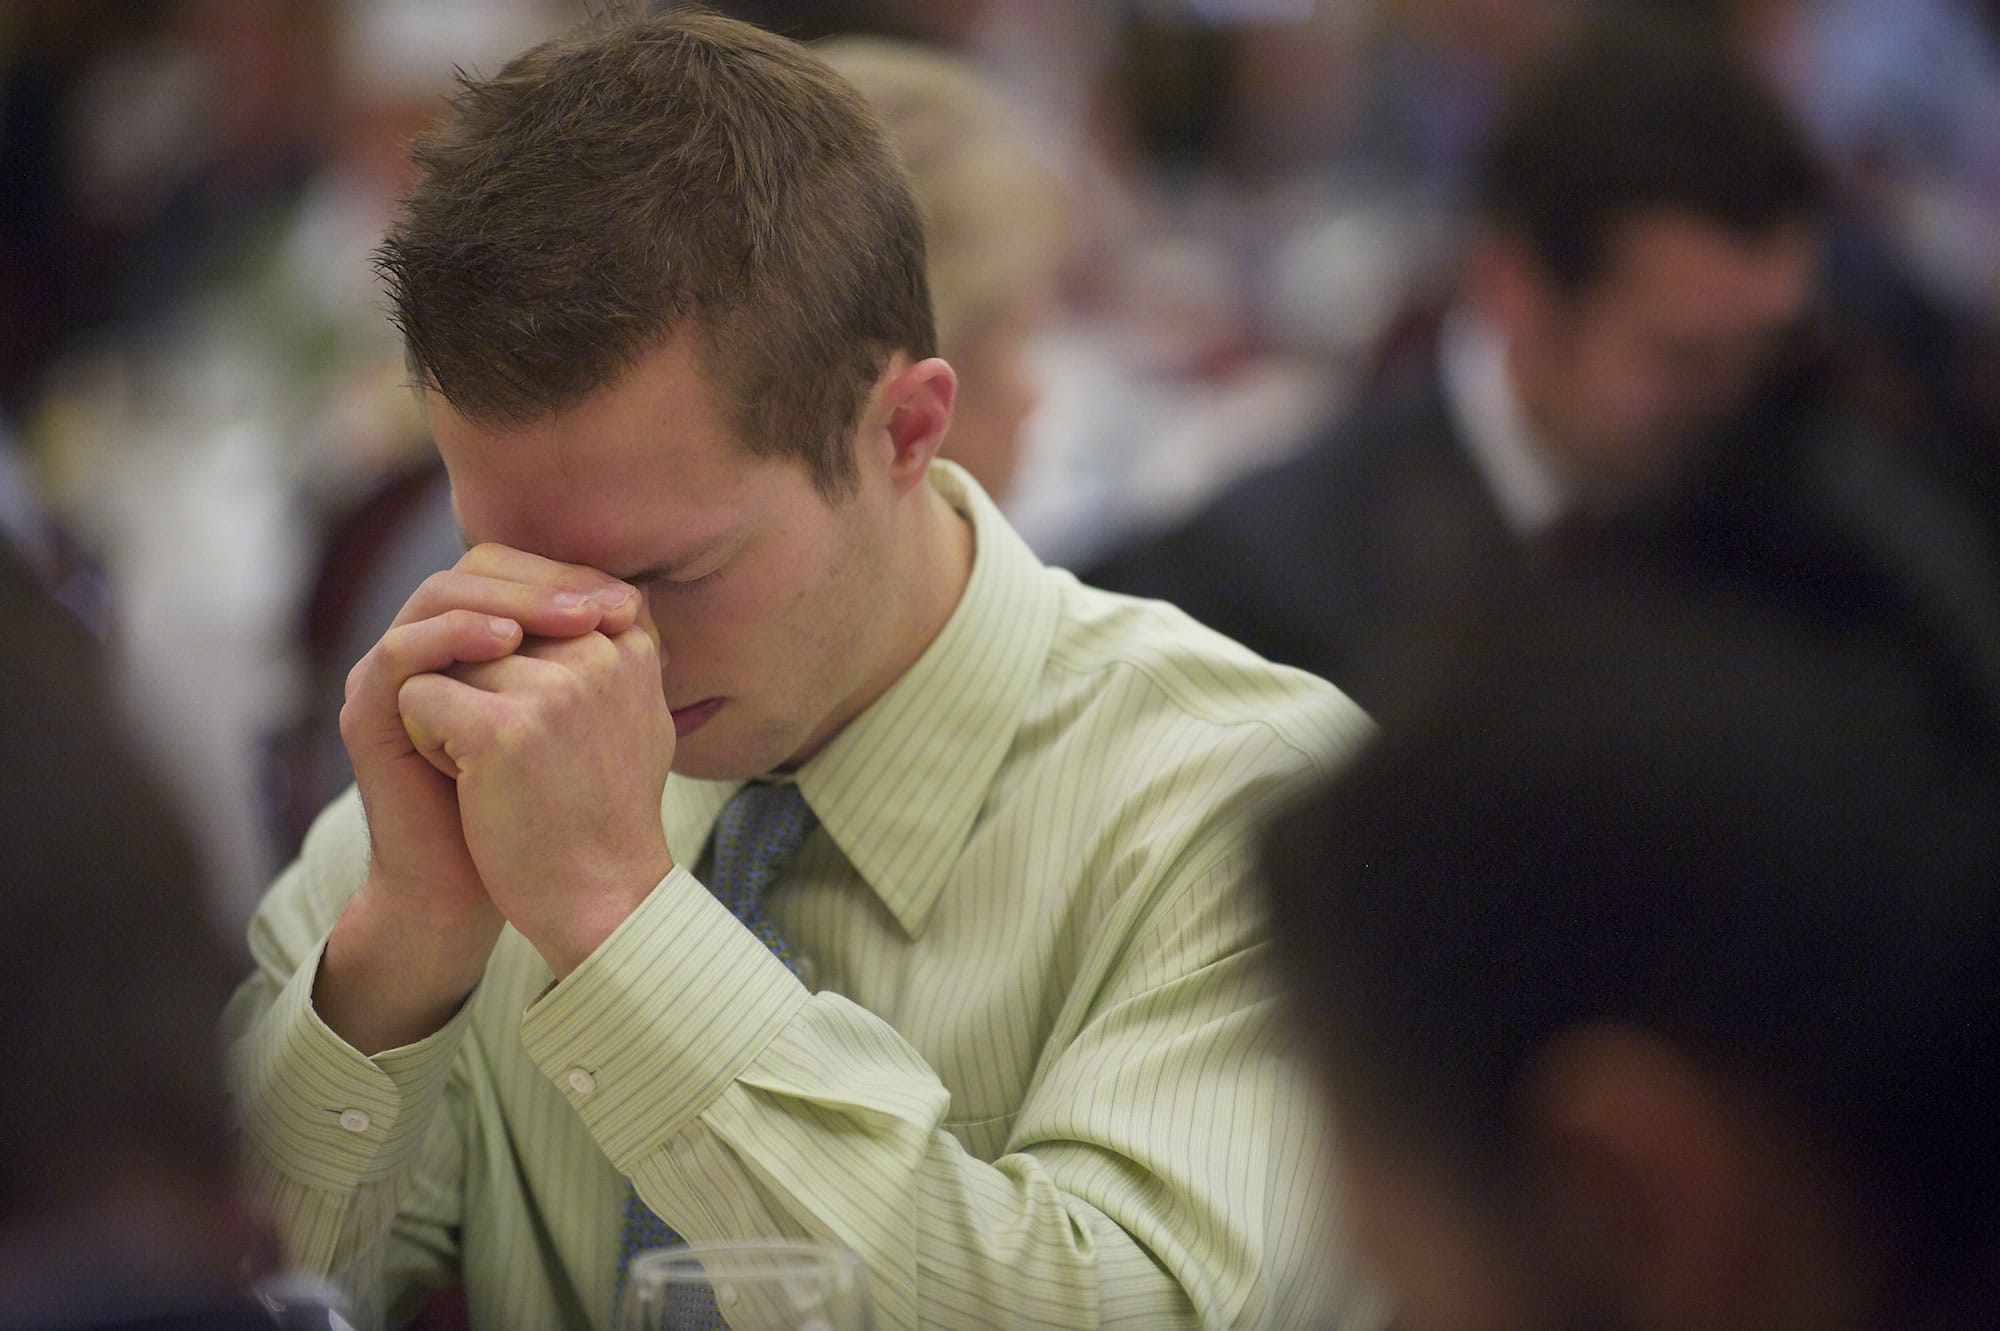 Jeff Miller, 23, of Washougal, prays during the Clark County Mayors' and Civic Leaders' 11th Annual Prayer Breakfast at the Hilton Vancouver Washington on Friday.